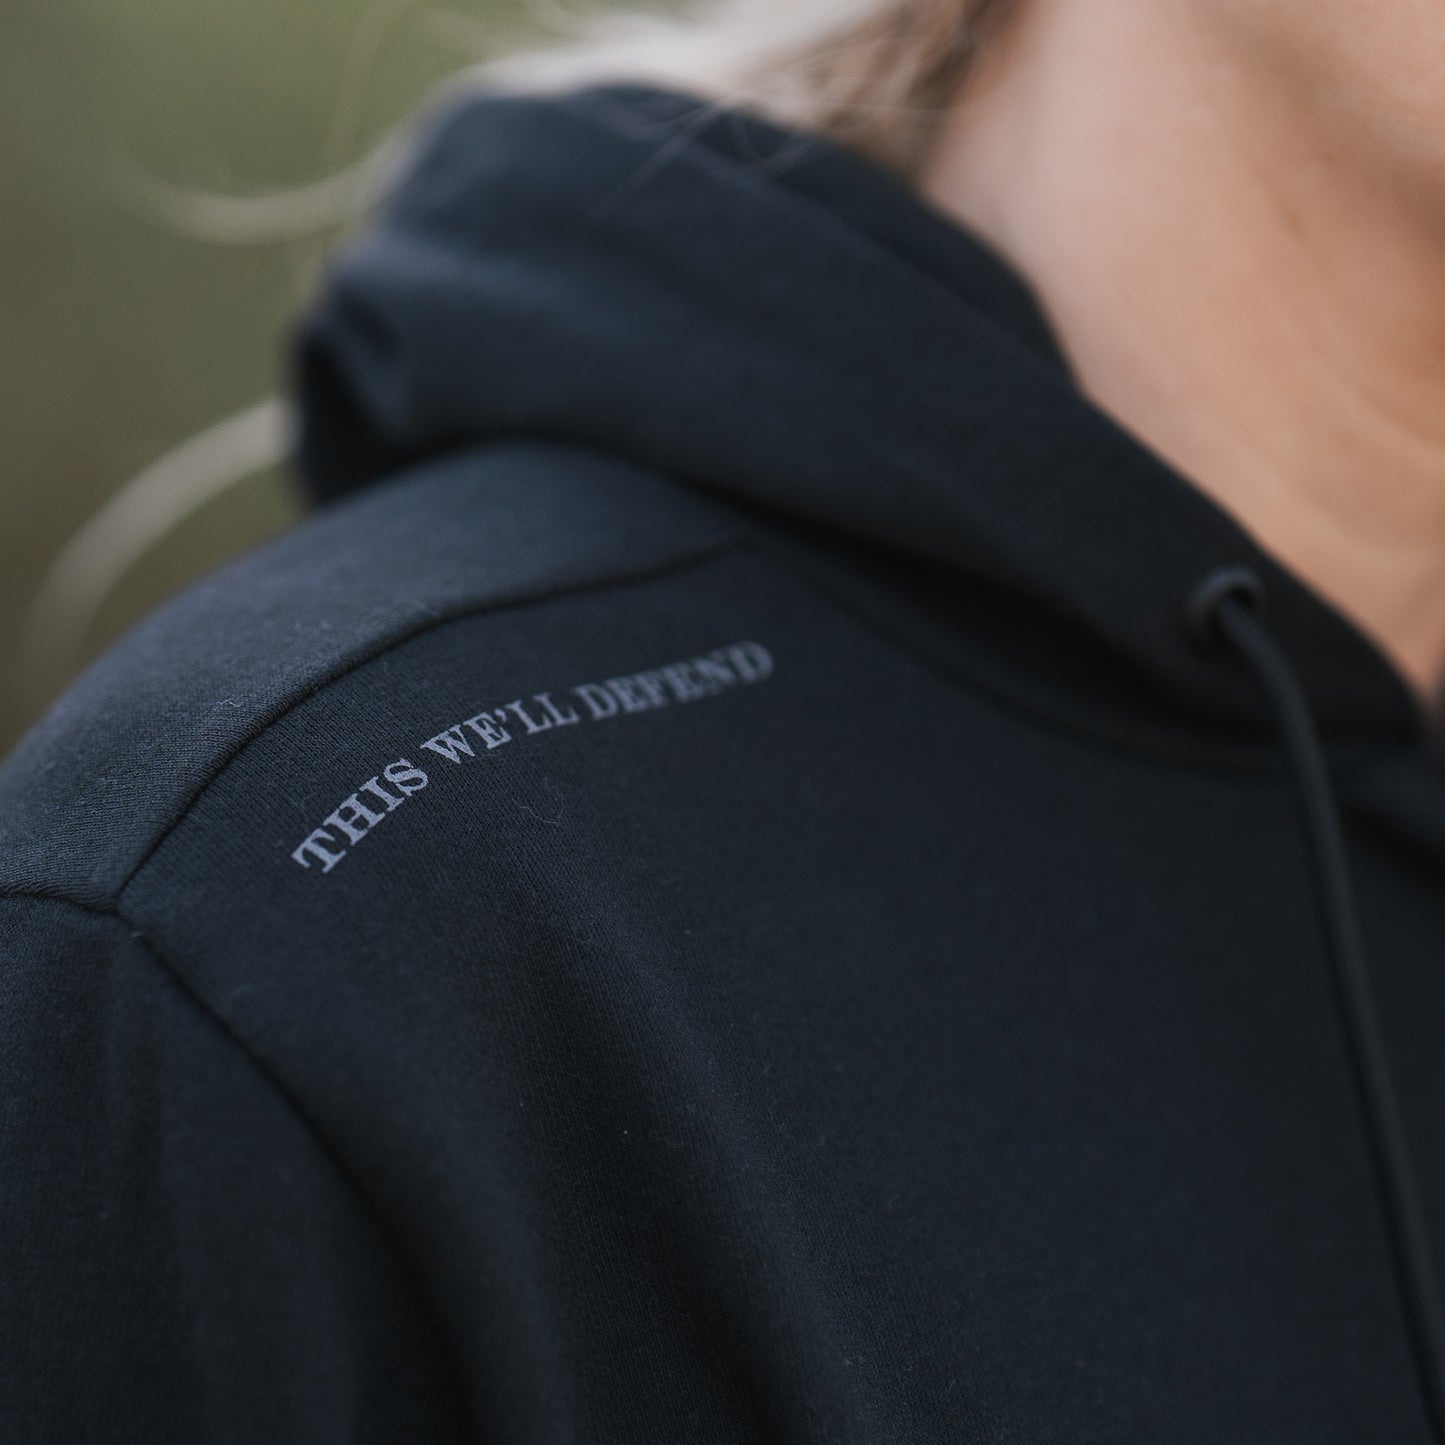 Performance Hoodie Designed for Women at the GYm 